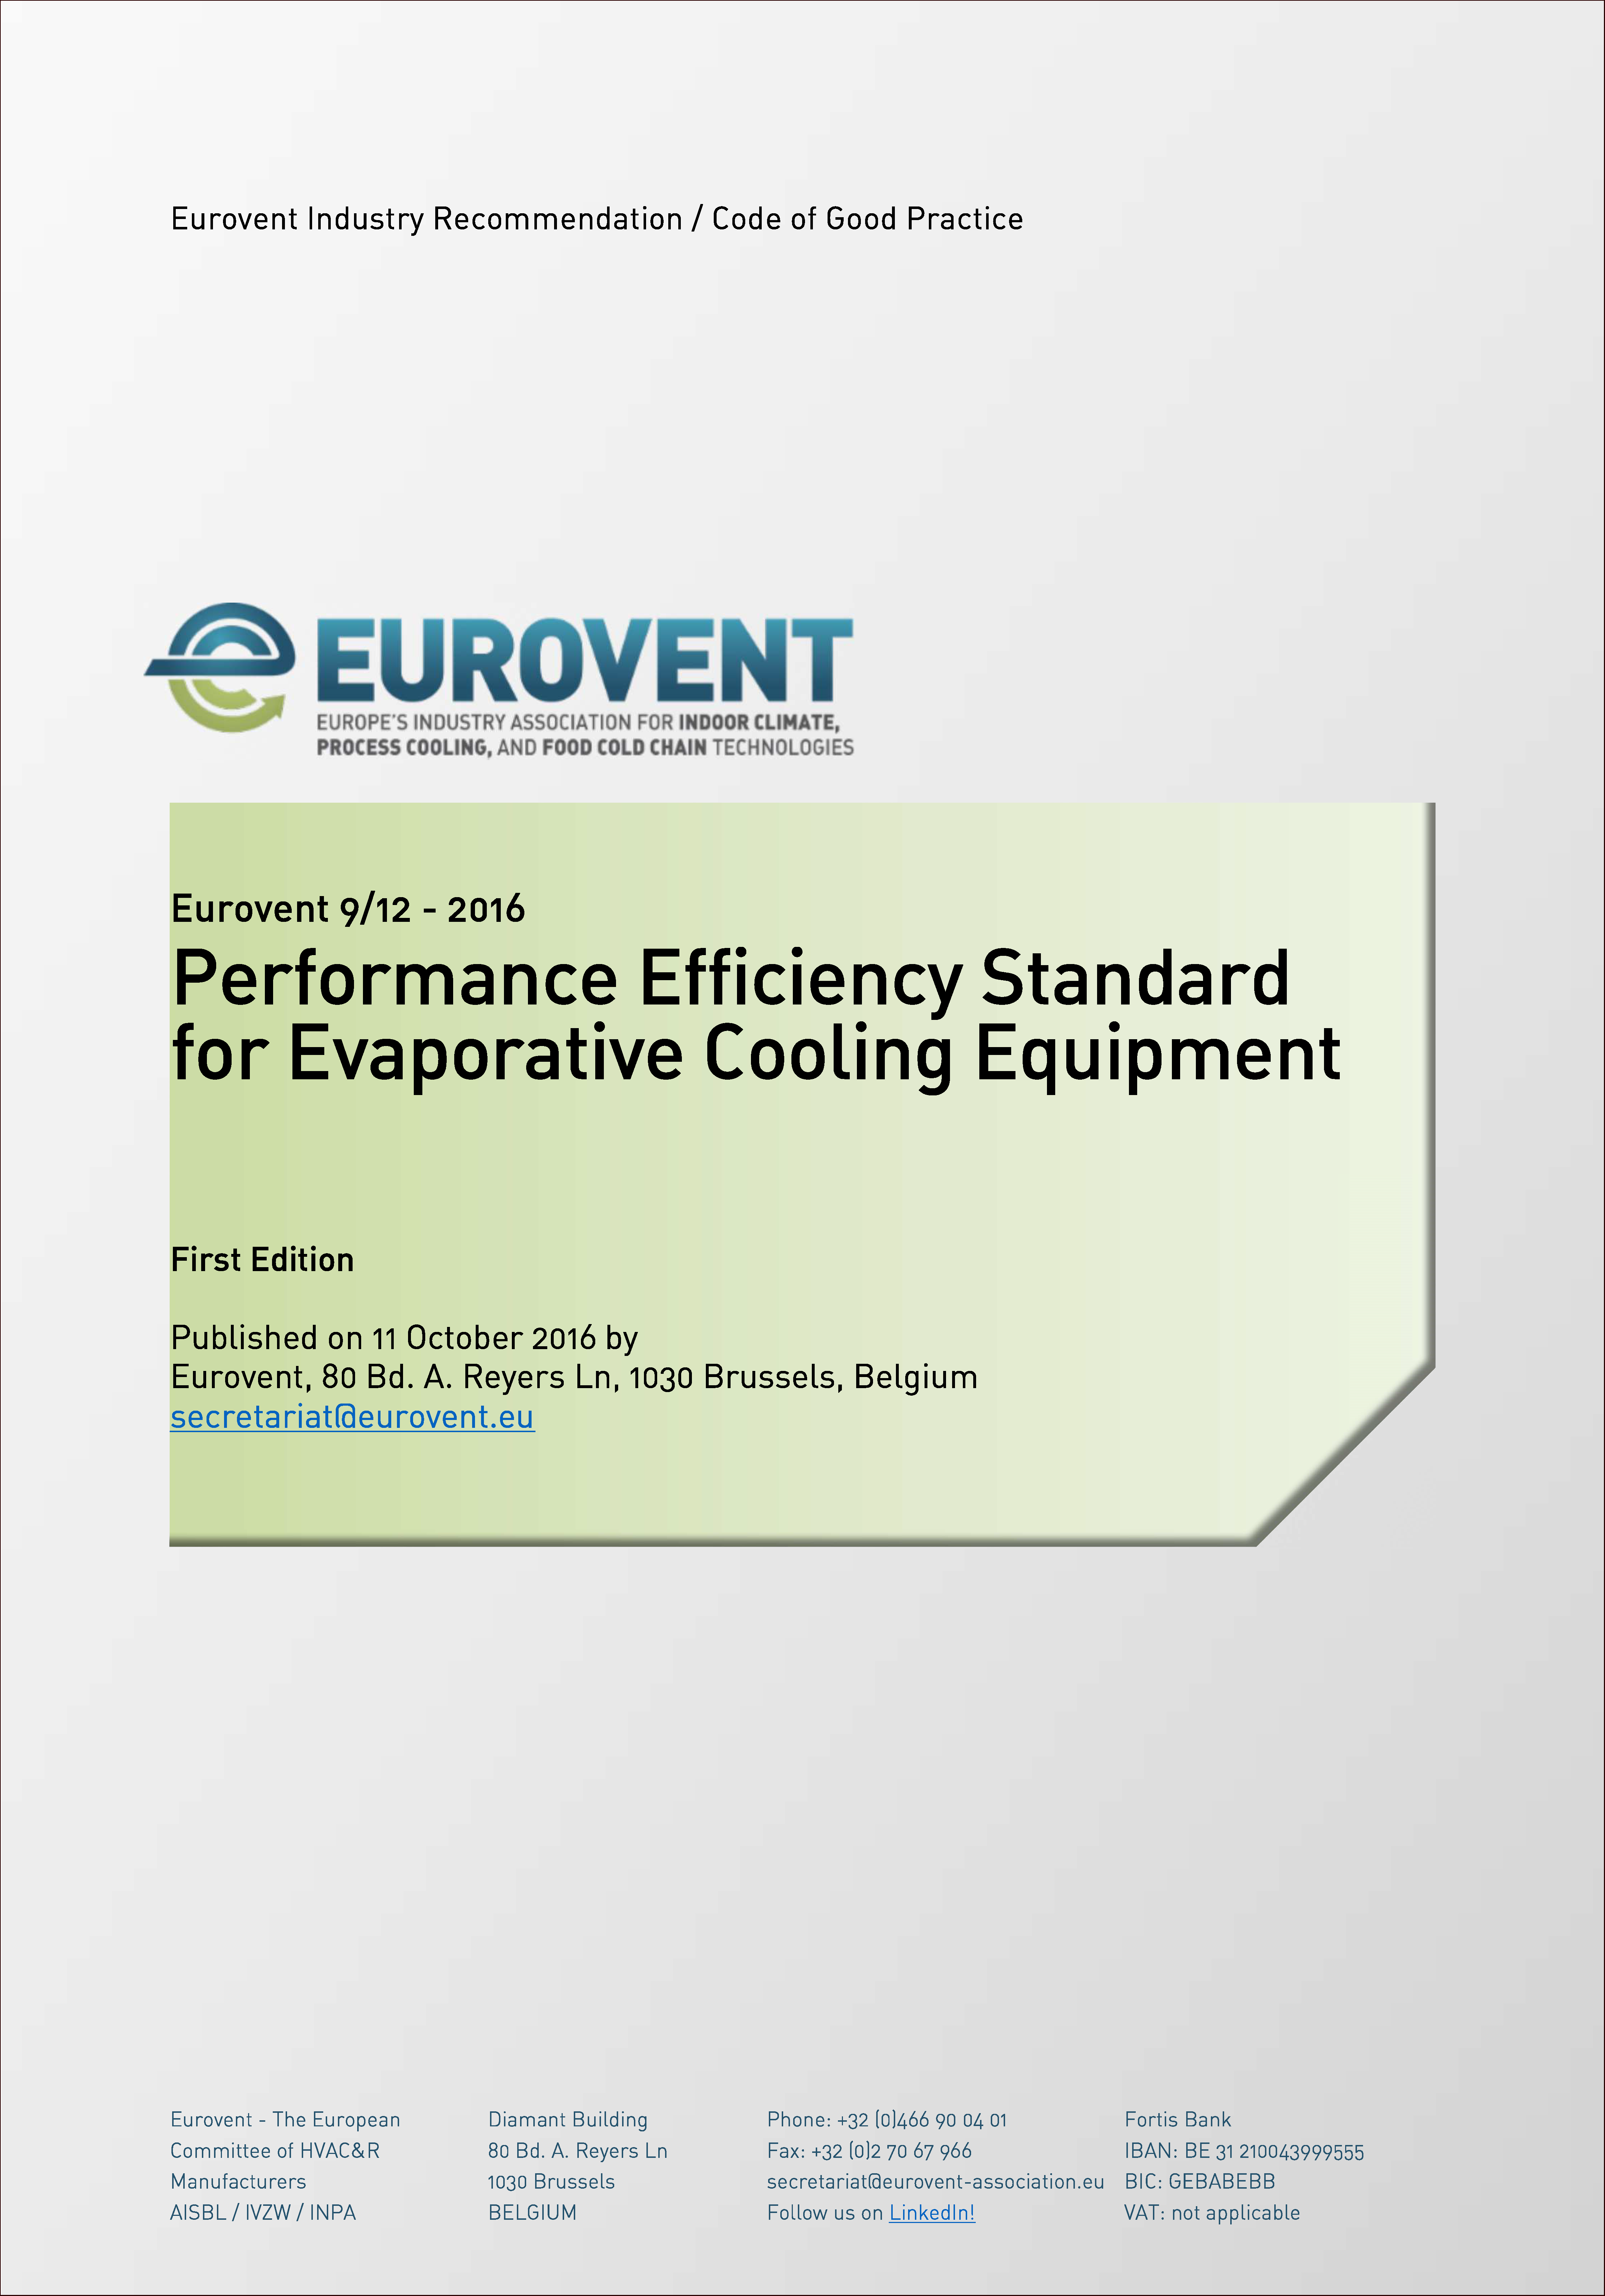 2016 - Performance Efficiency Standard for Evaporative Cooling Equipment